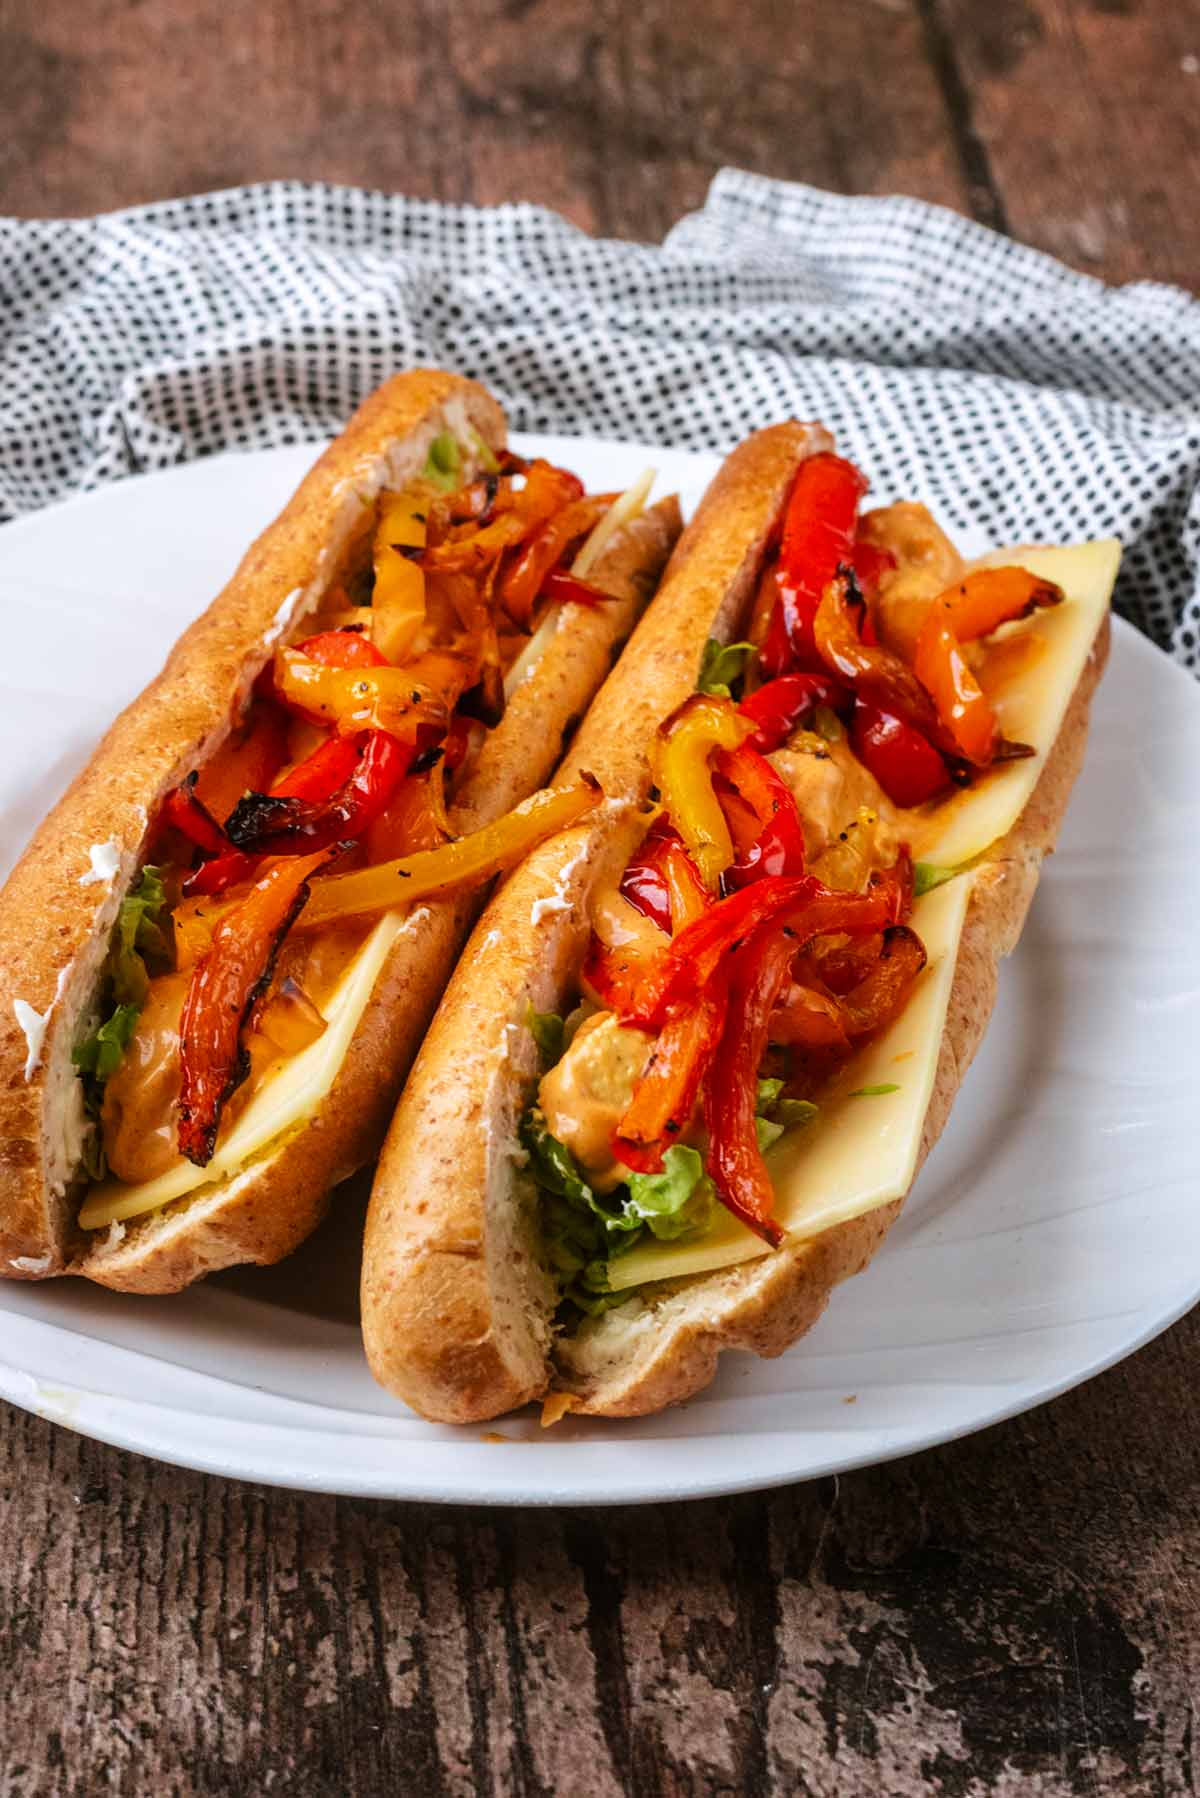 Two baguettes filled with chicken, cheese, salad and topped with cooked pepper strips.